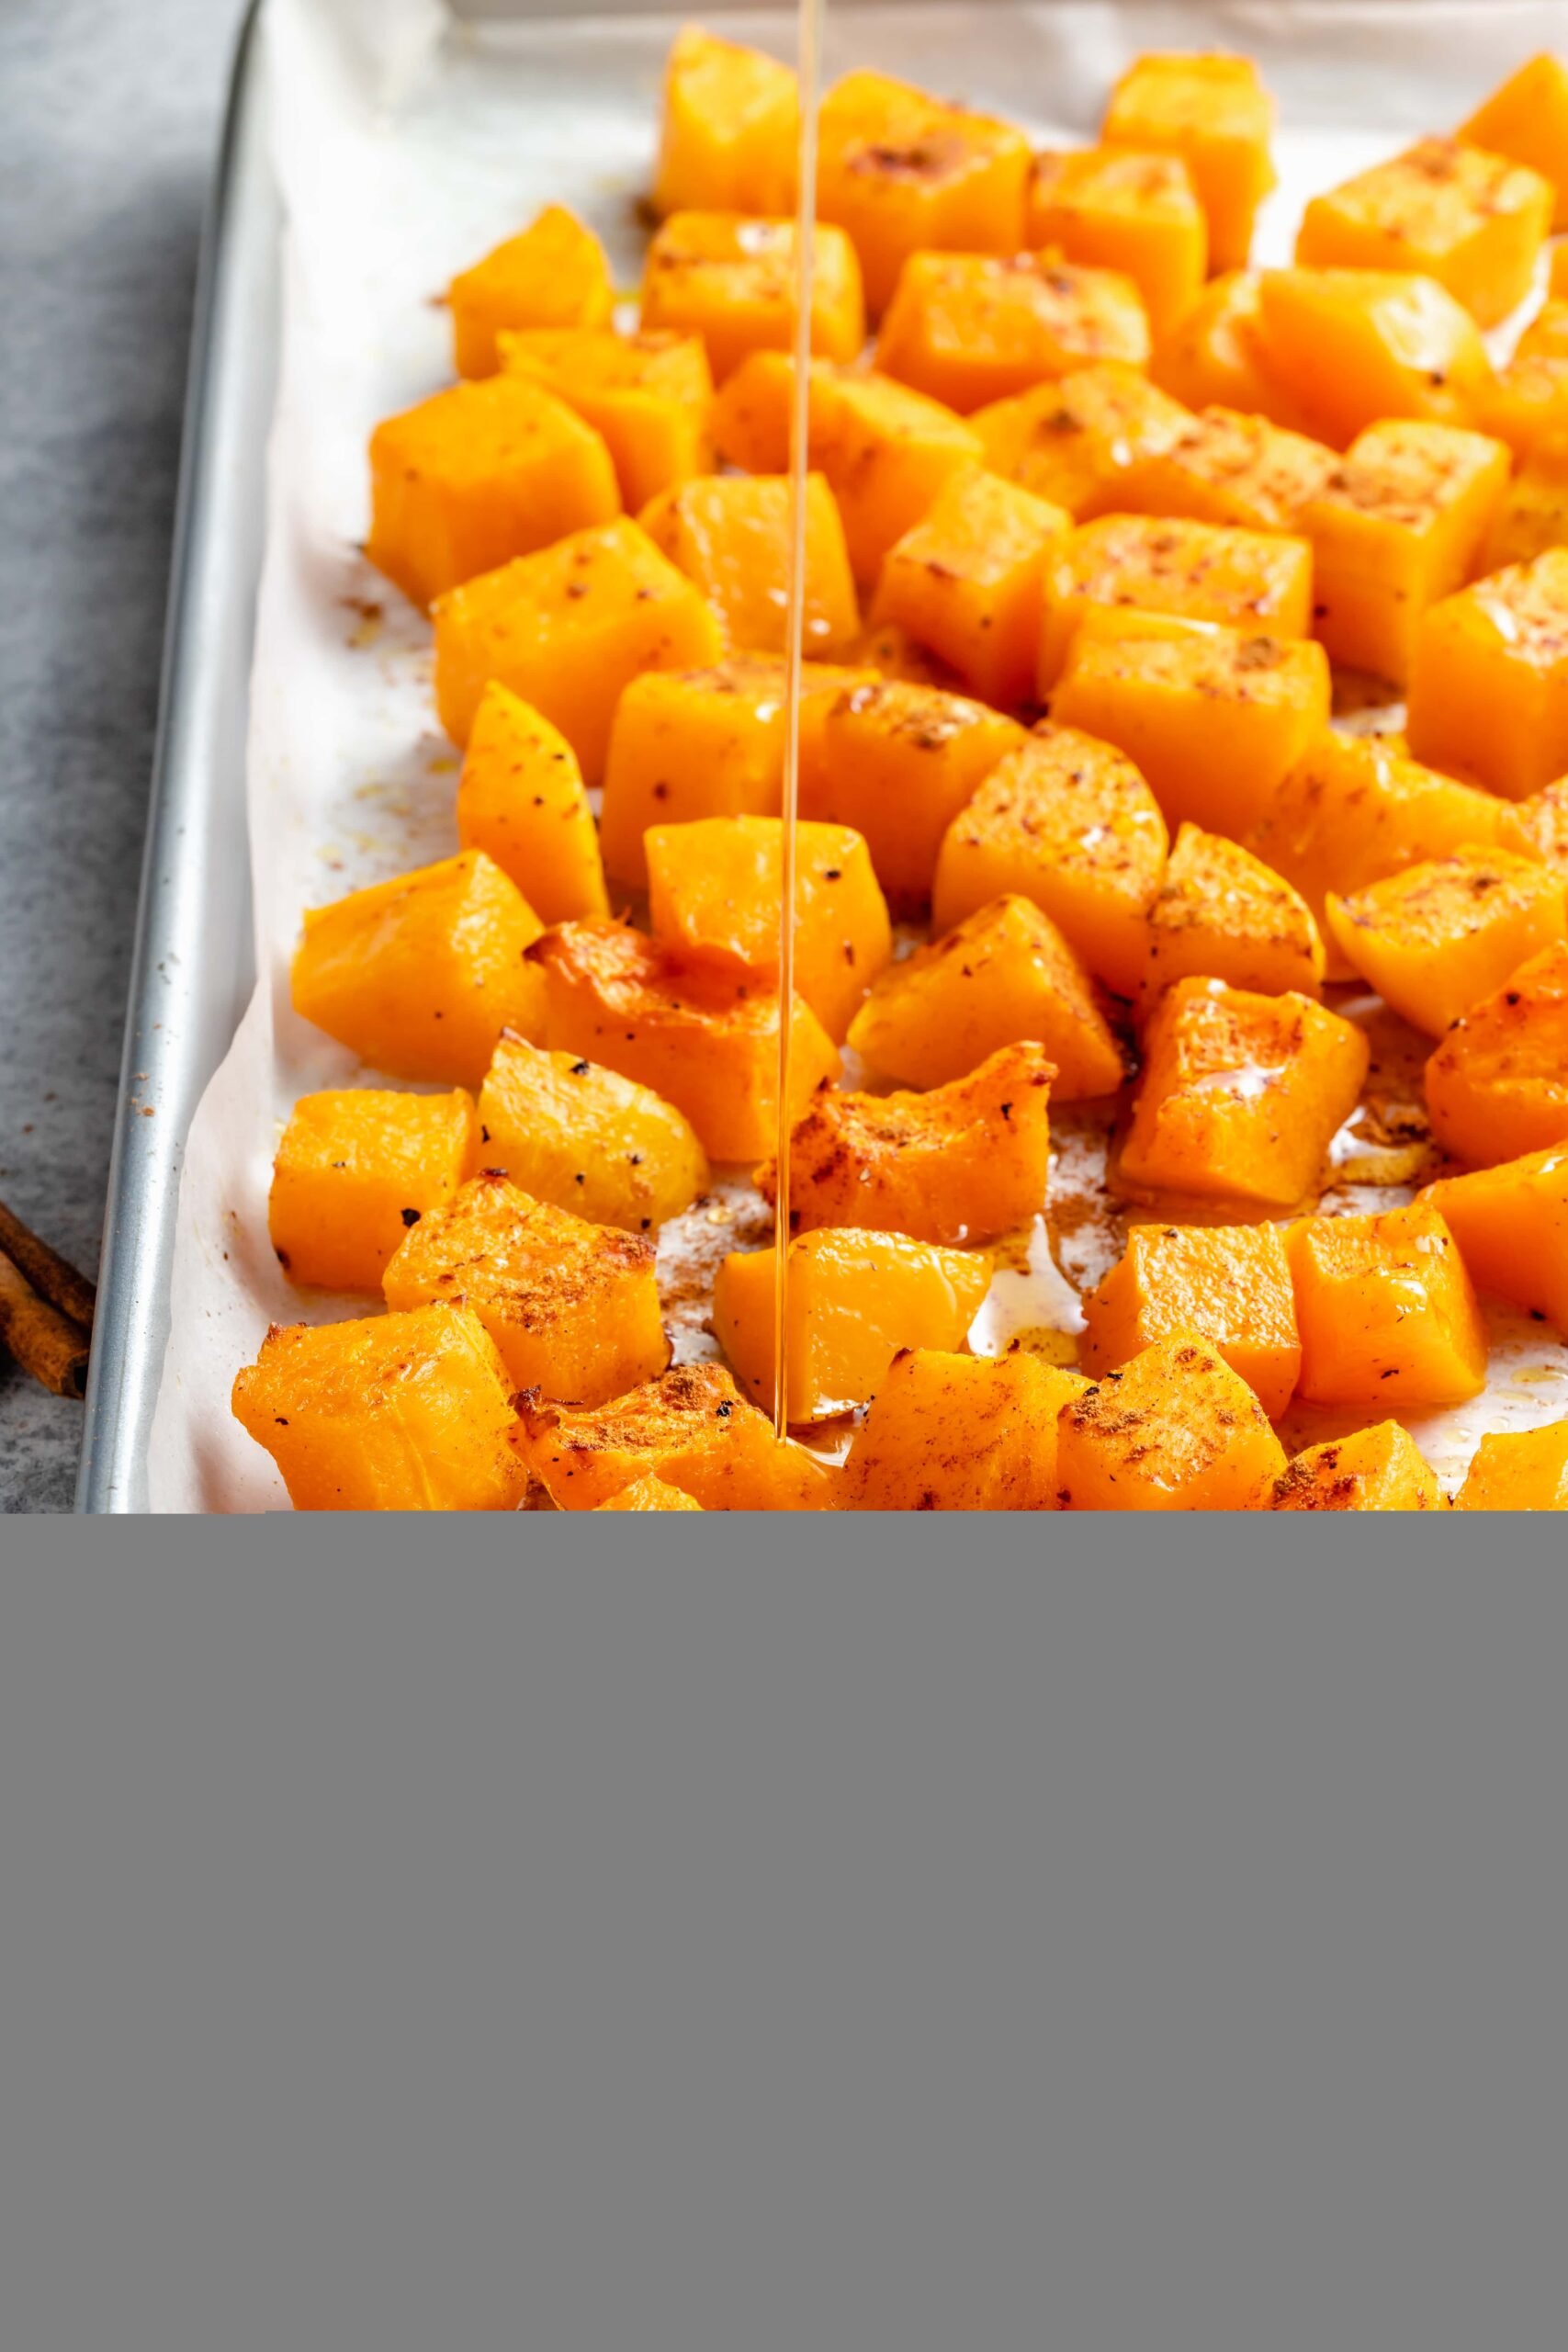 https://allthehealthythings.com/wp-content/uploads/2021/10/How-to-Cook-Butternut-Squash-5-scaled.jpg